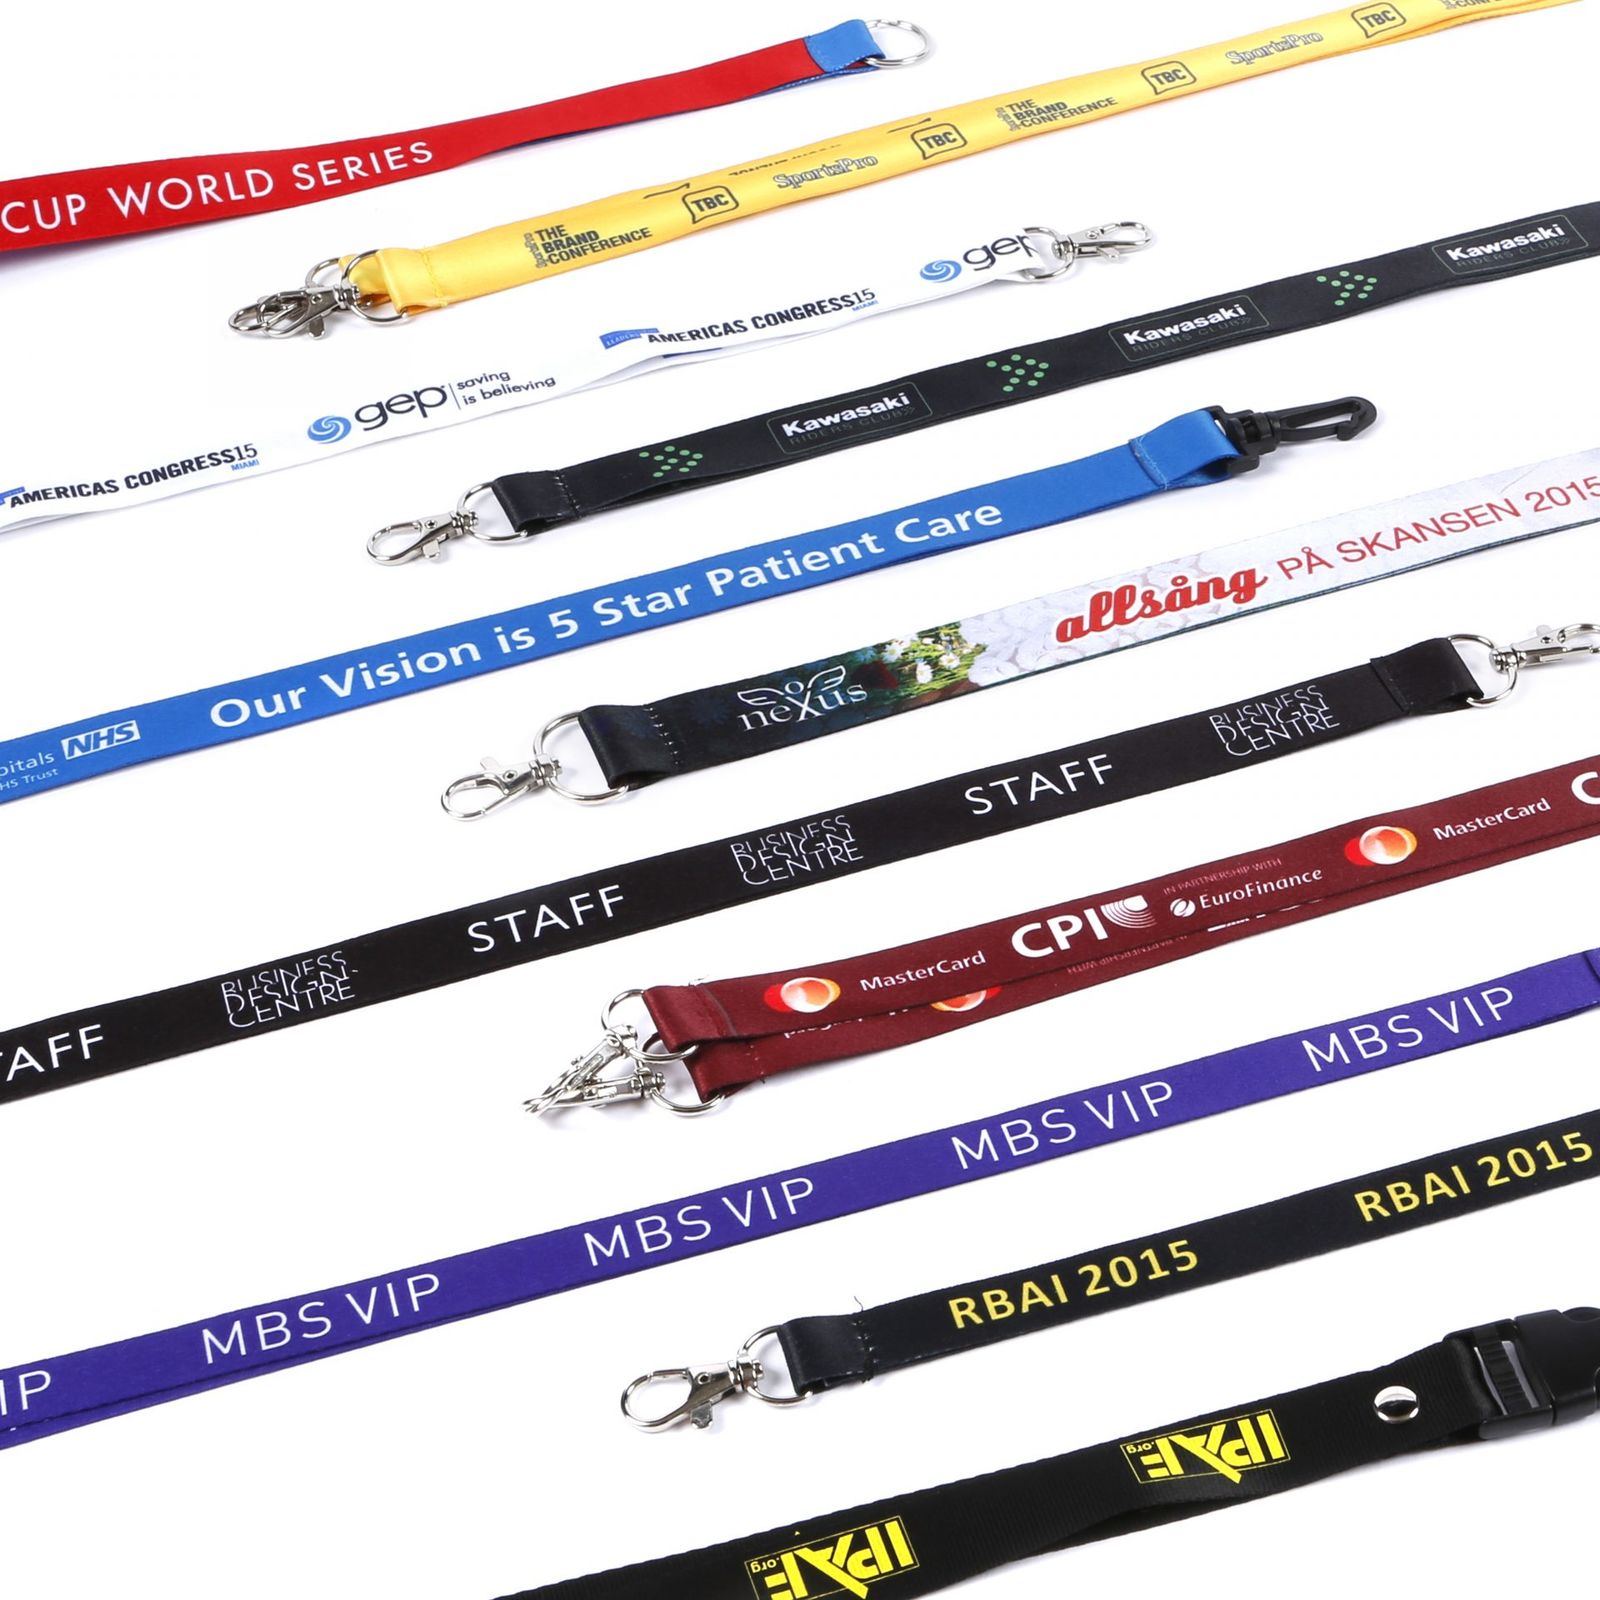 The power of branded lanyards